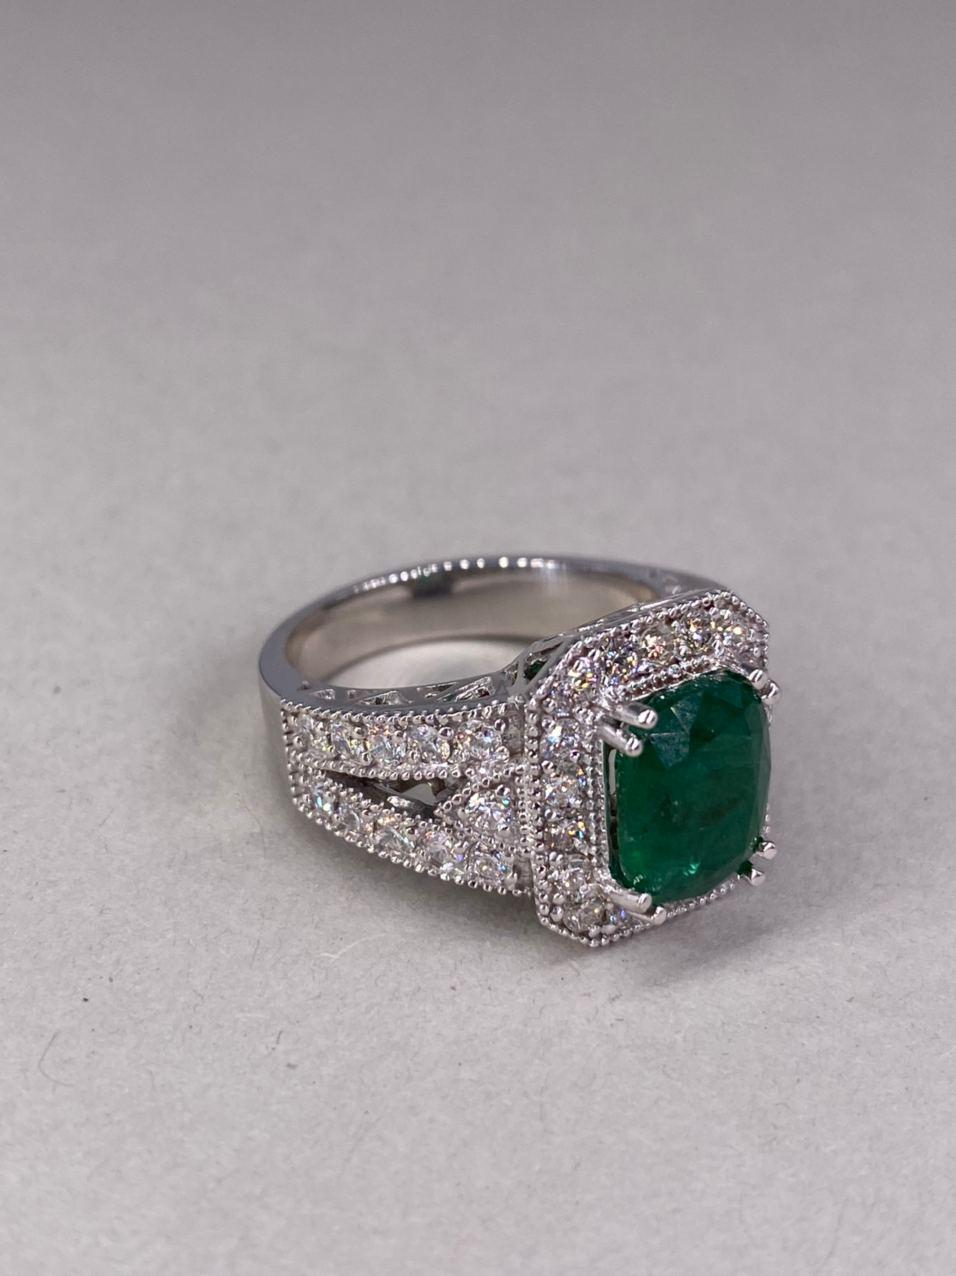 Modern Solid White Gold 18 Karat Diamond 3.17 Carat Natural Emerald Ring for Her For Sale